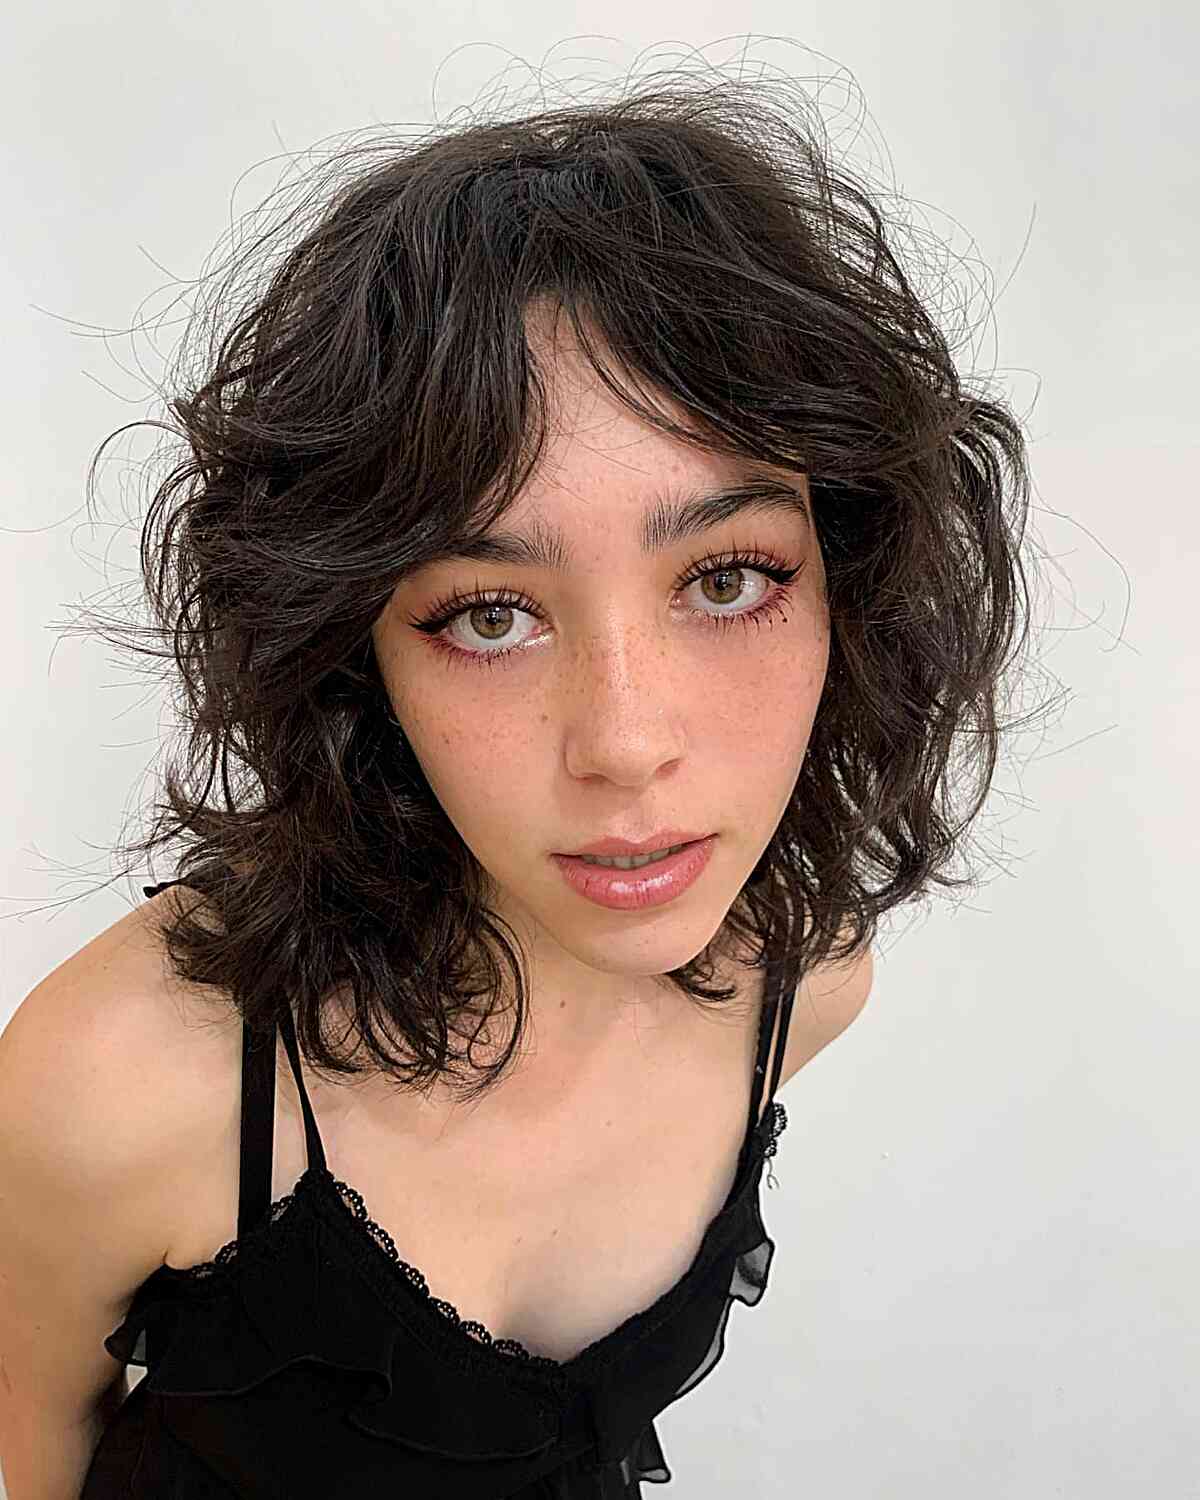 Medium Short Tousled Wolf Cut with Middle Part Bangs